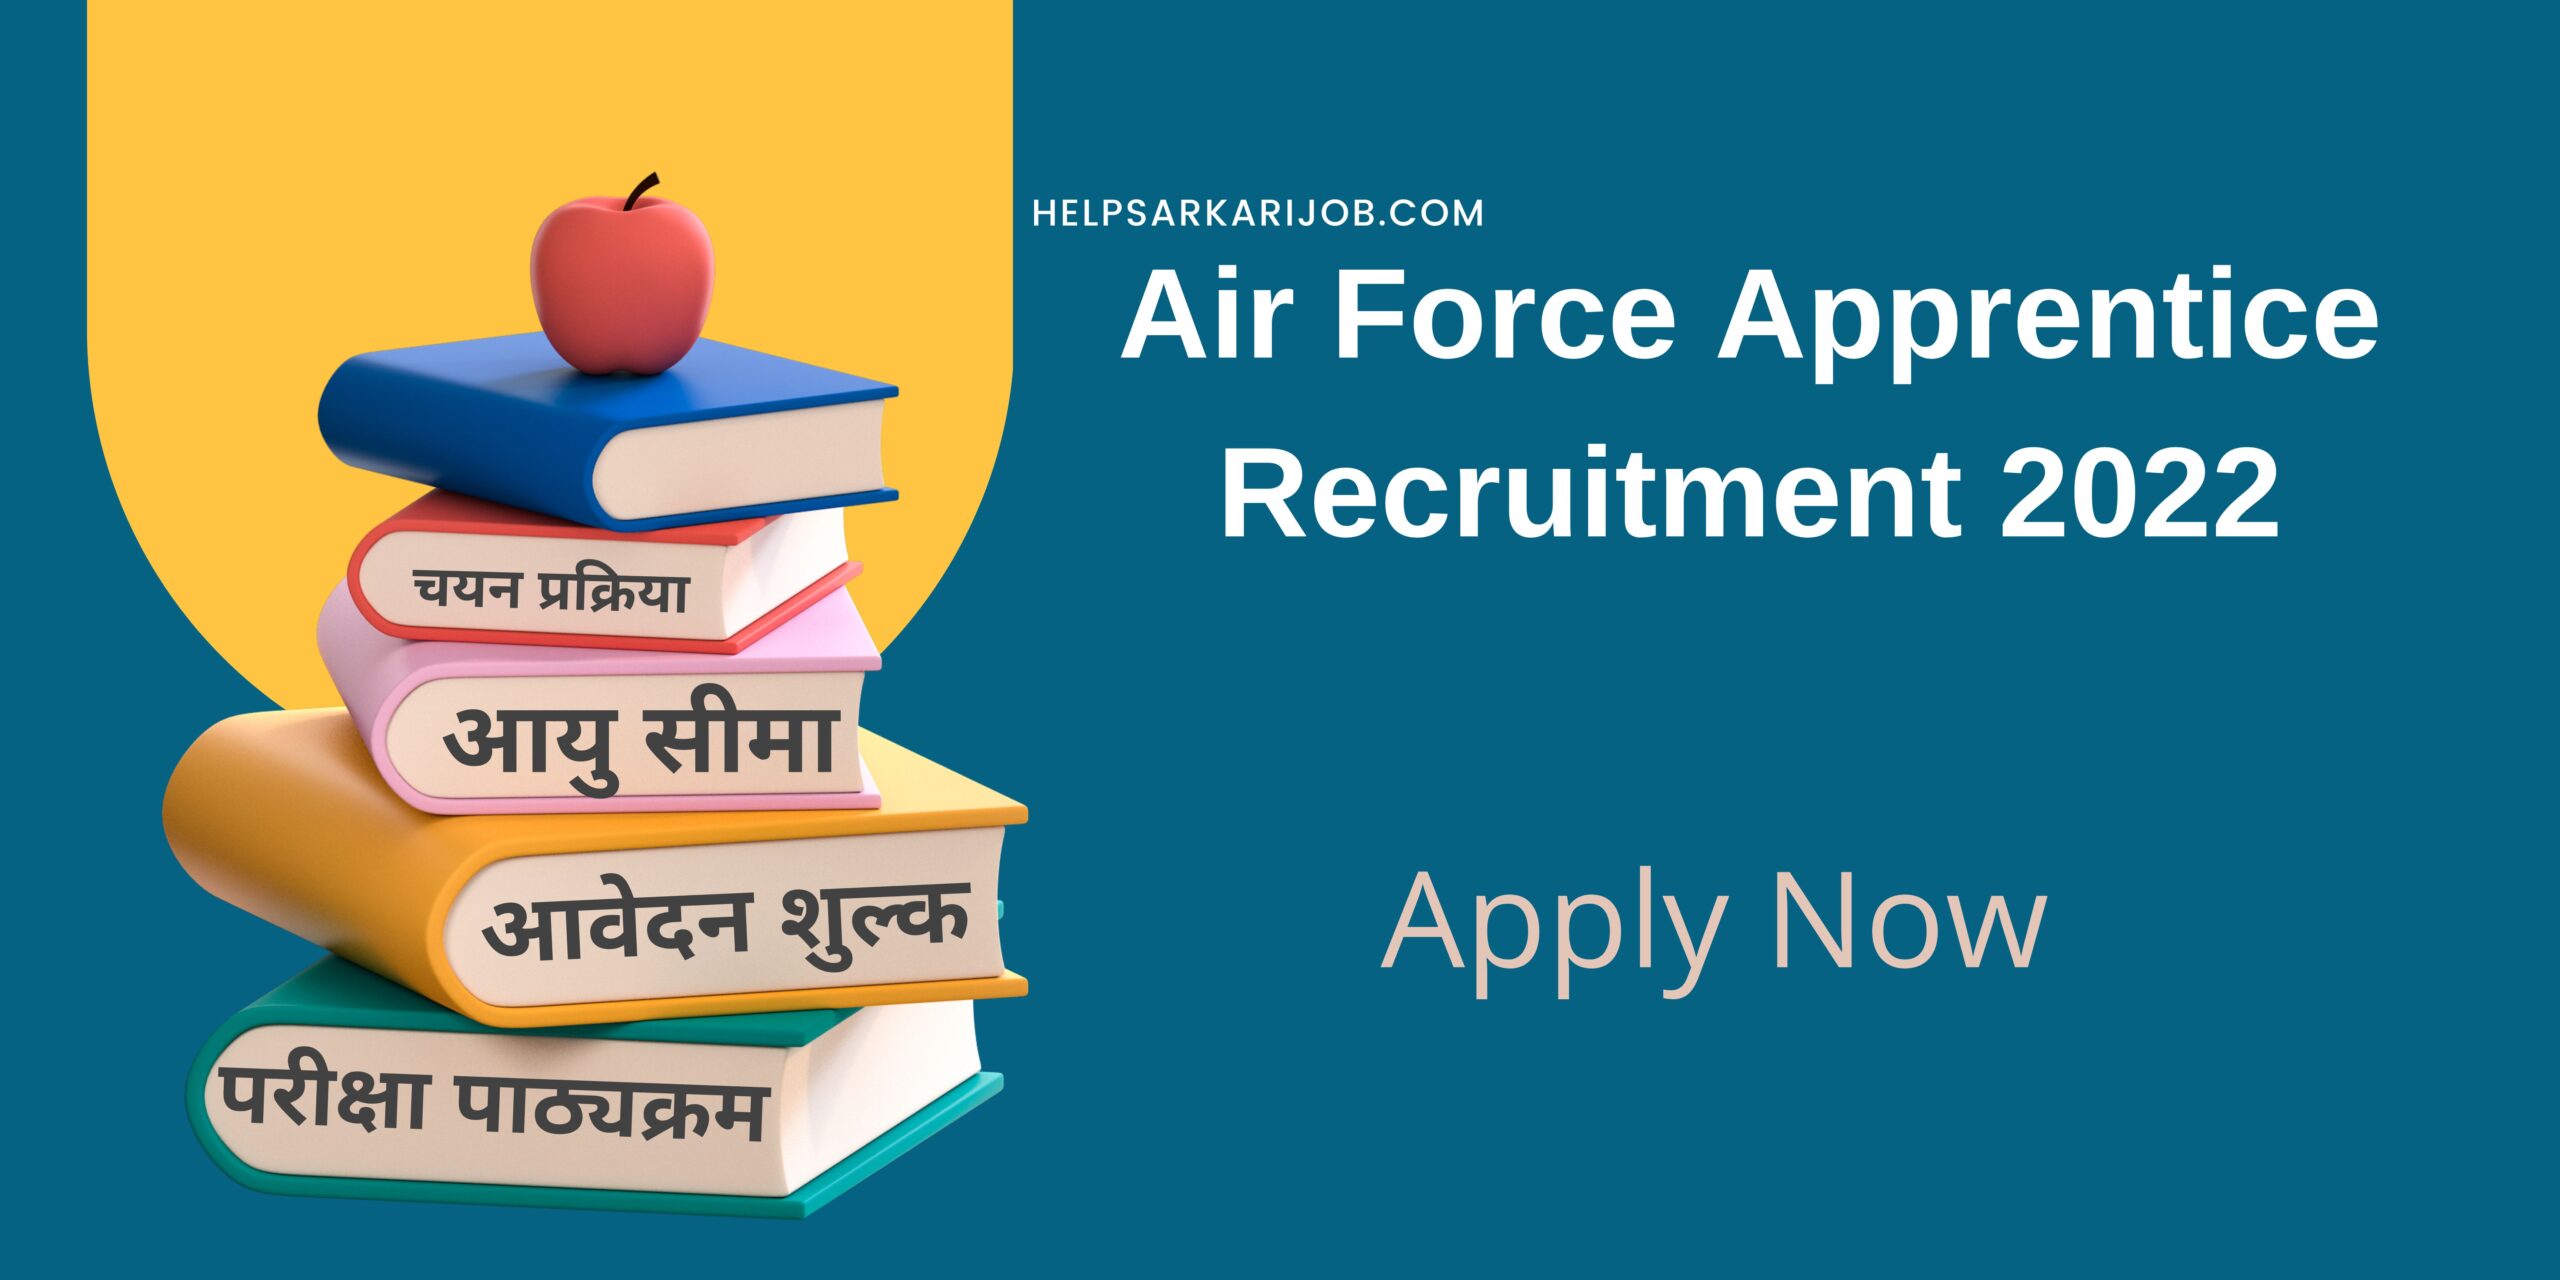 Air Force Apprentice Recruitment 2022 scaled -